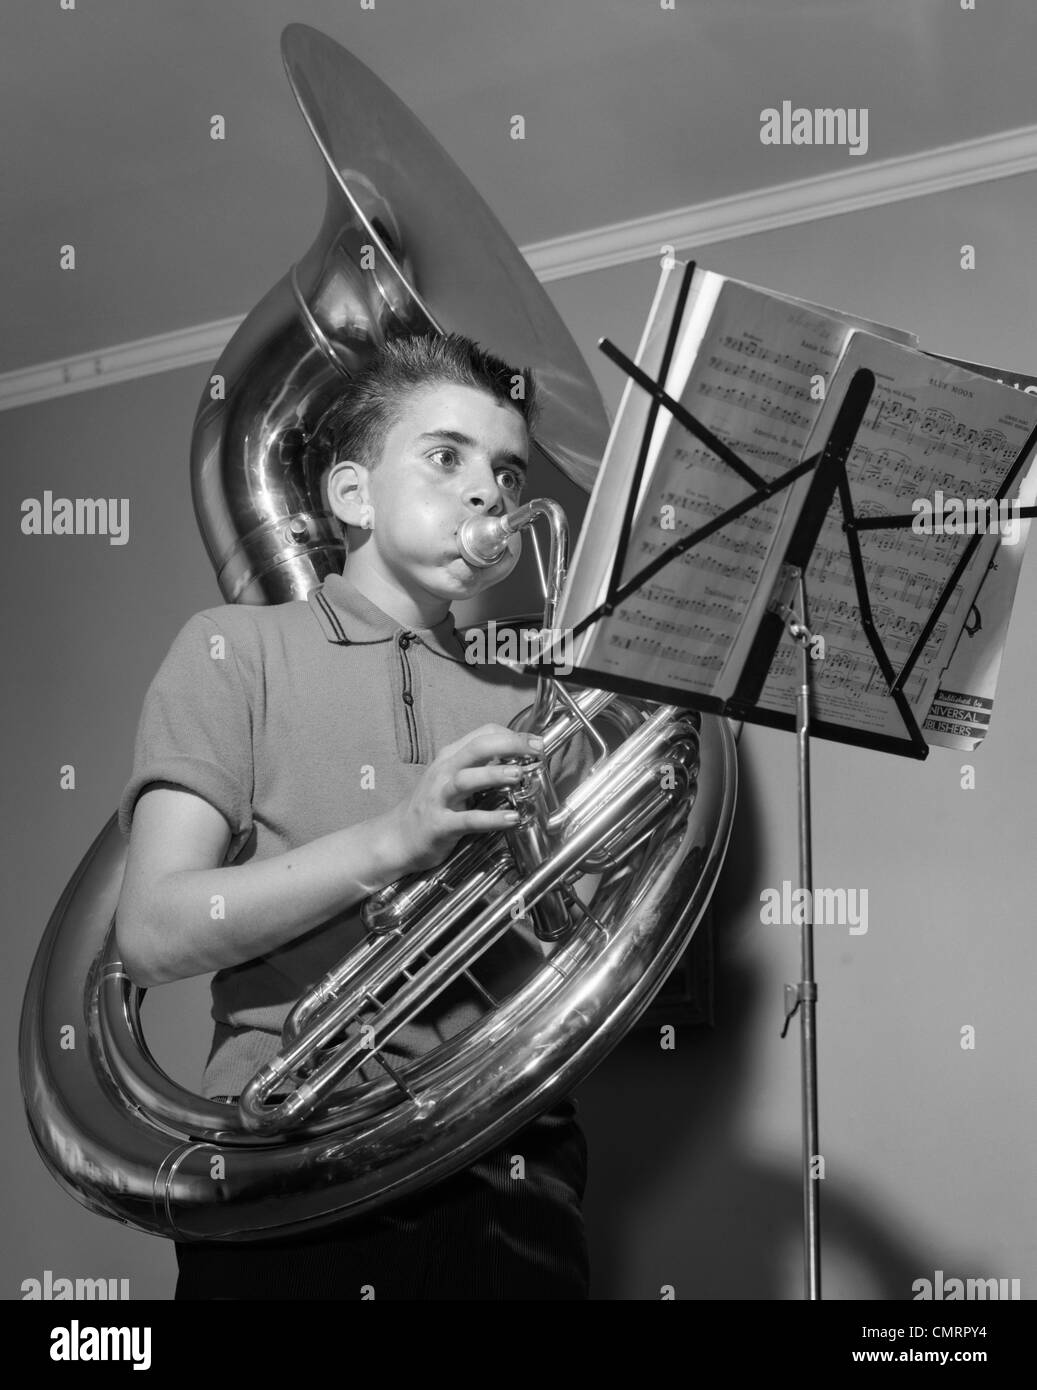 1960s BOY PLAYING THE TUBA WHILE READING FROM SHEET MUSIC ON A MUSIC STAND INSIDE Stock Photo